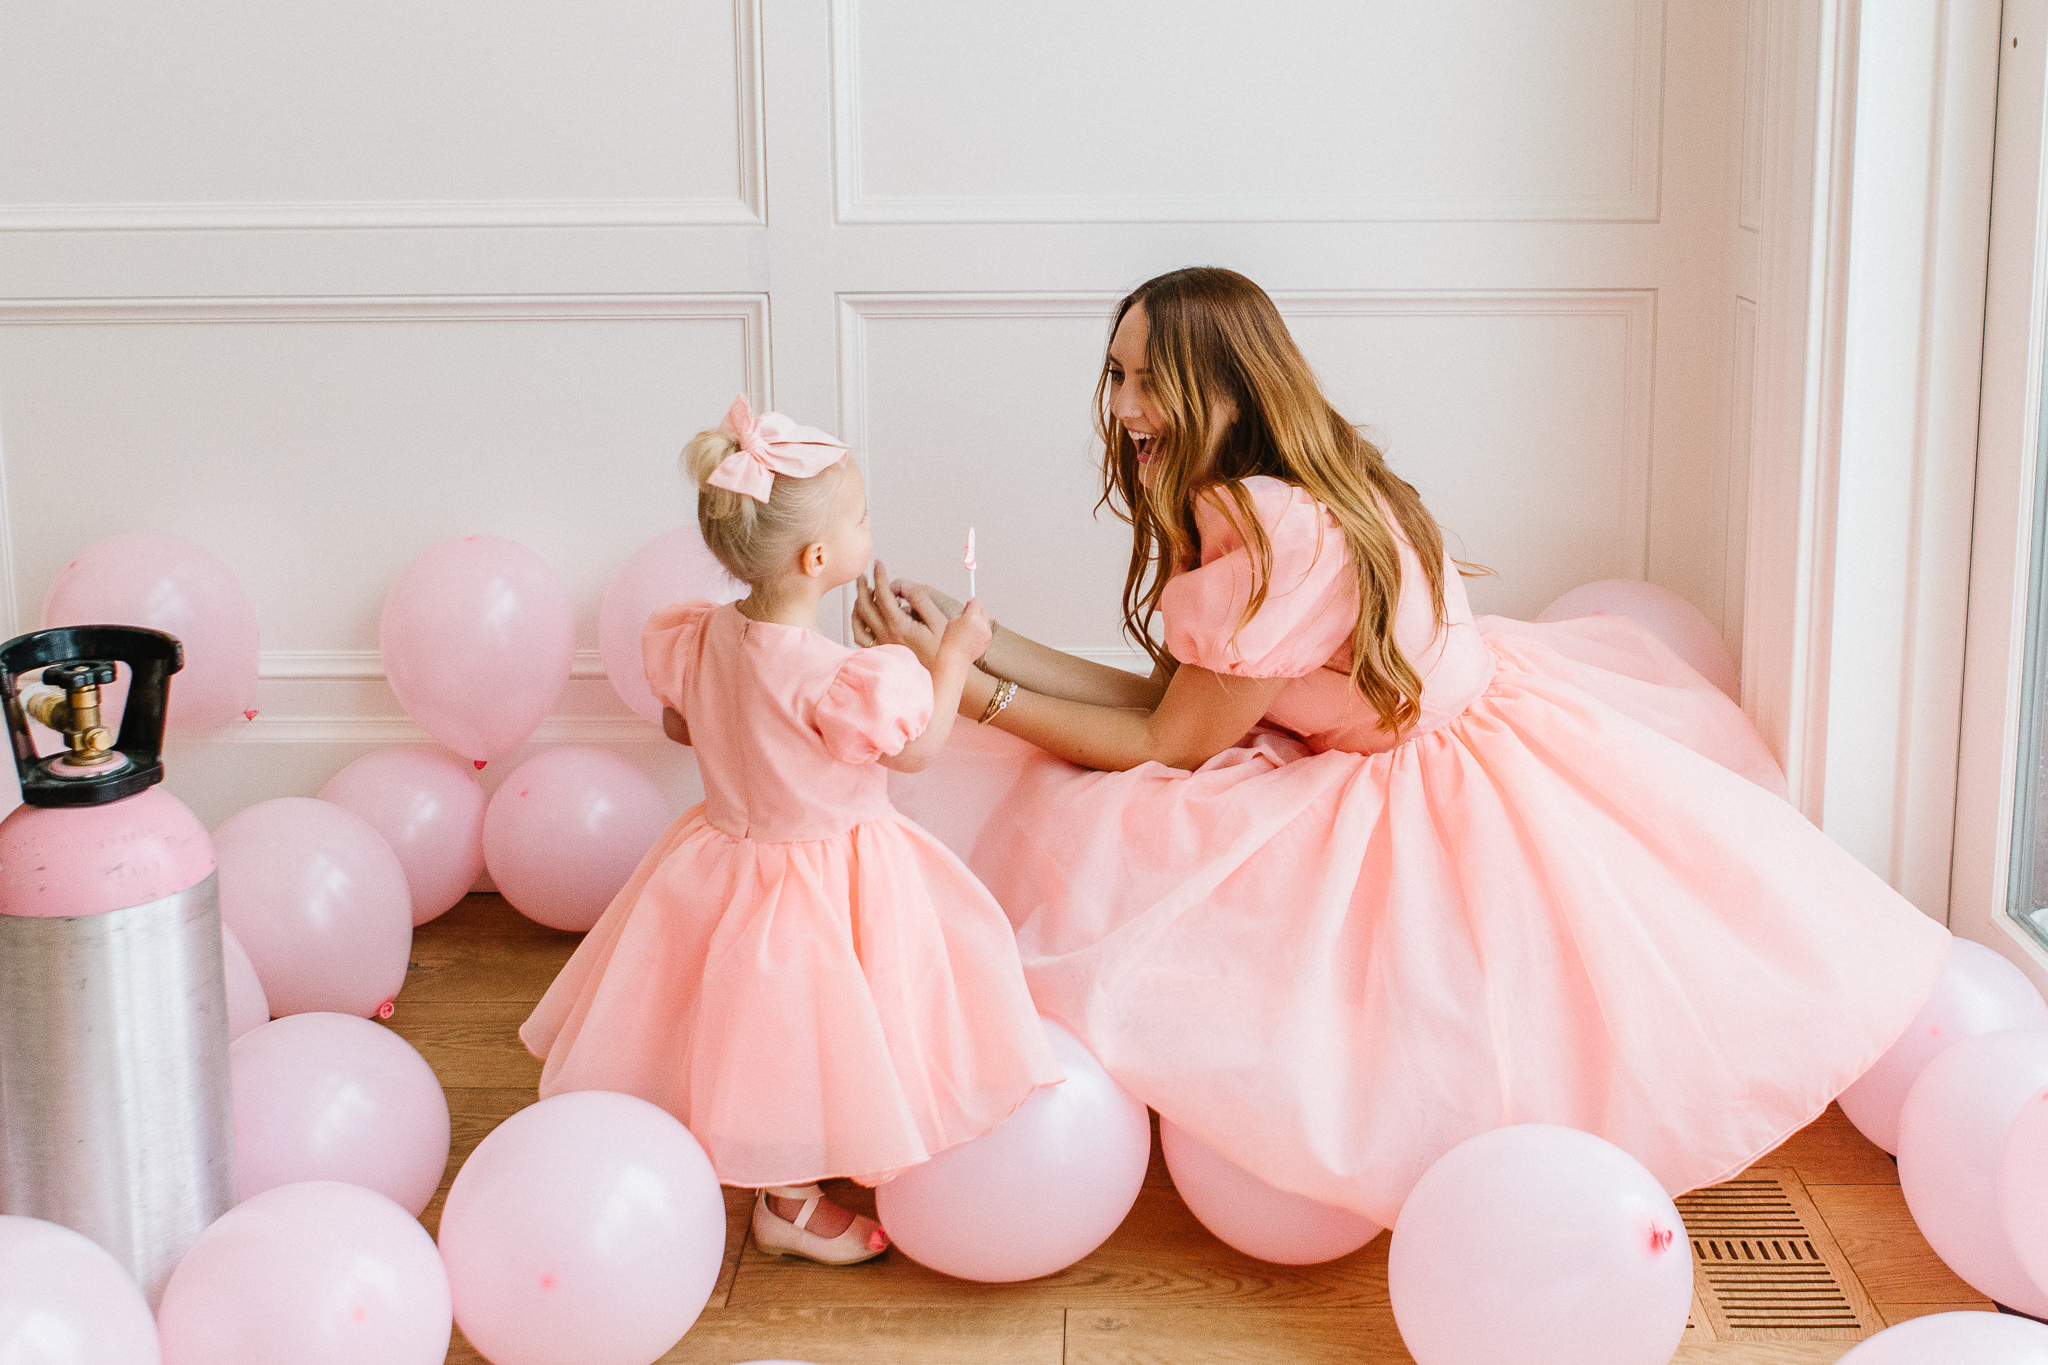 Madeline Hamilton built a mommy-and-me dress brand that has been worn by Joanna Gaines, Hilary Duff, Jessica Alba and more.